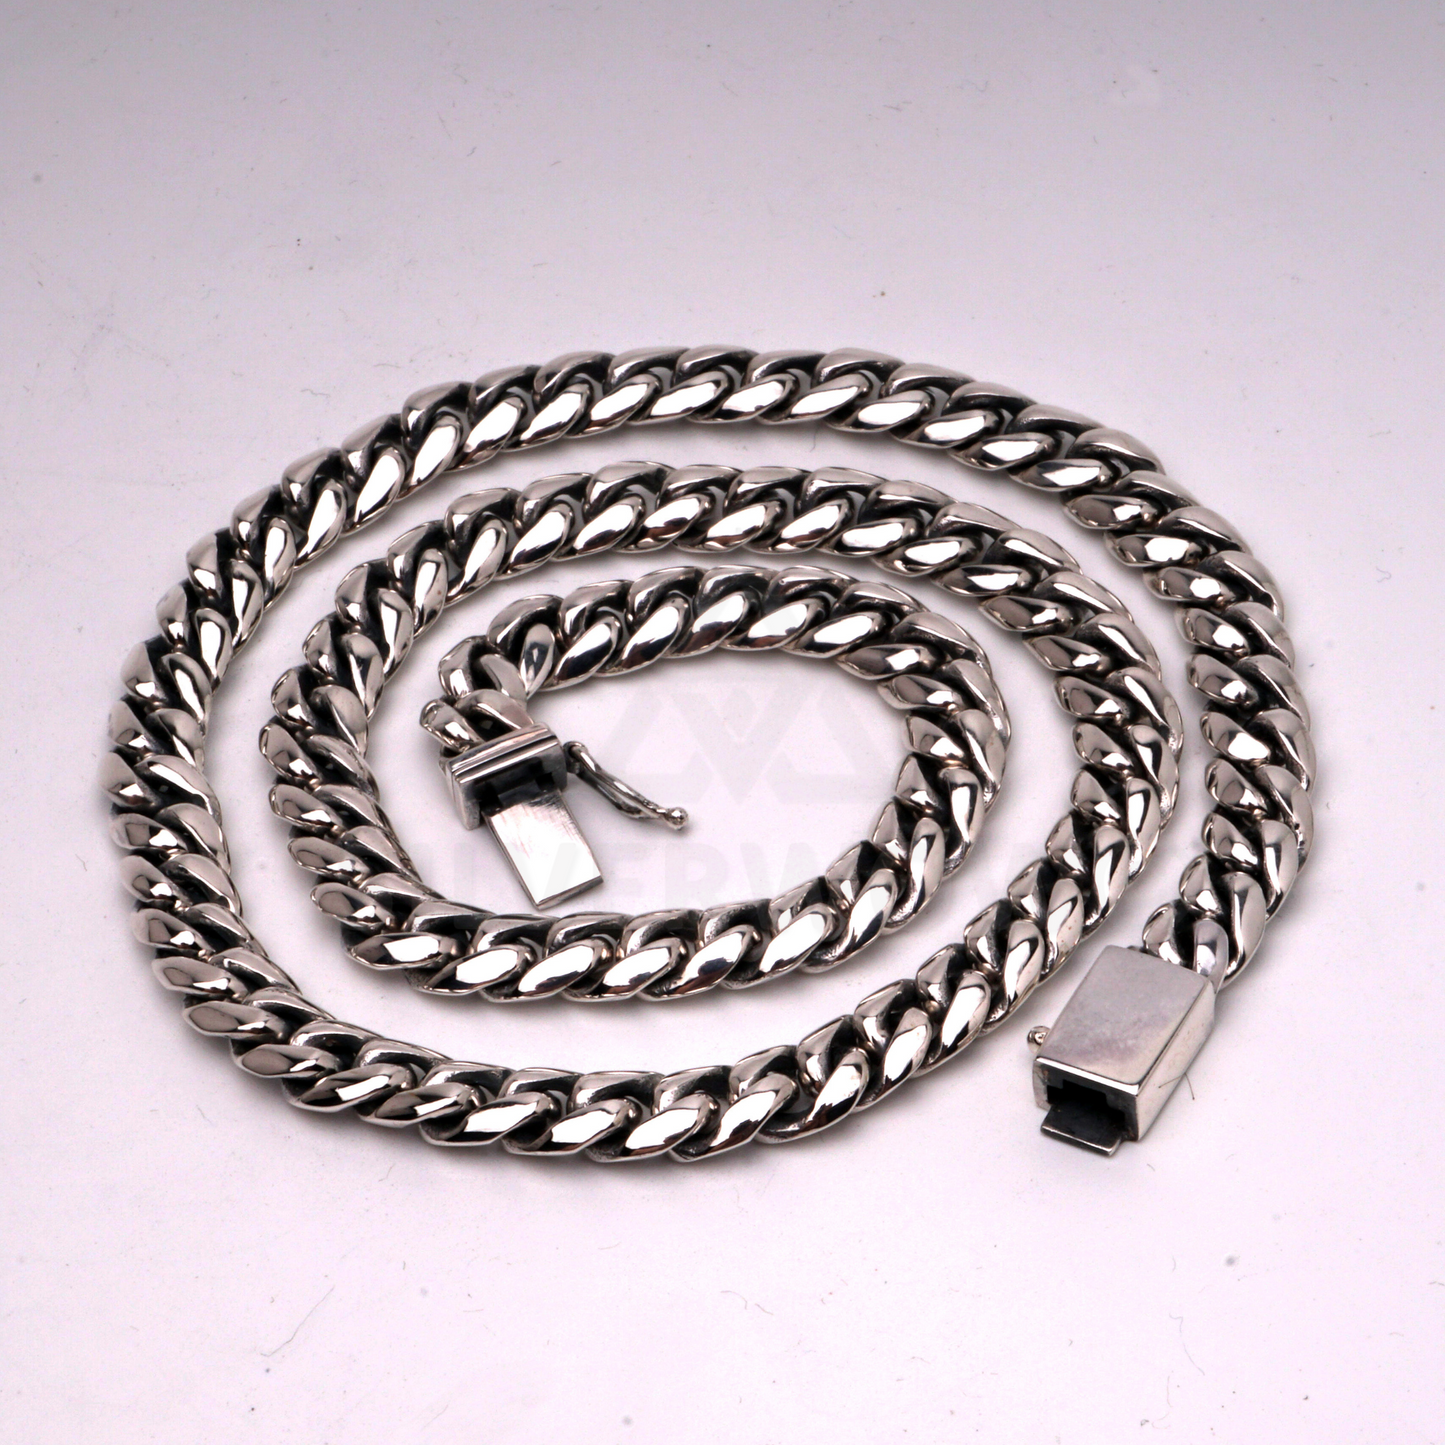 8mm Oval Miami Cuban Link Chain Necklace